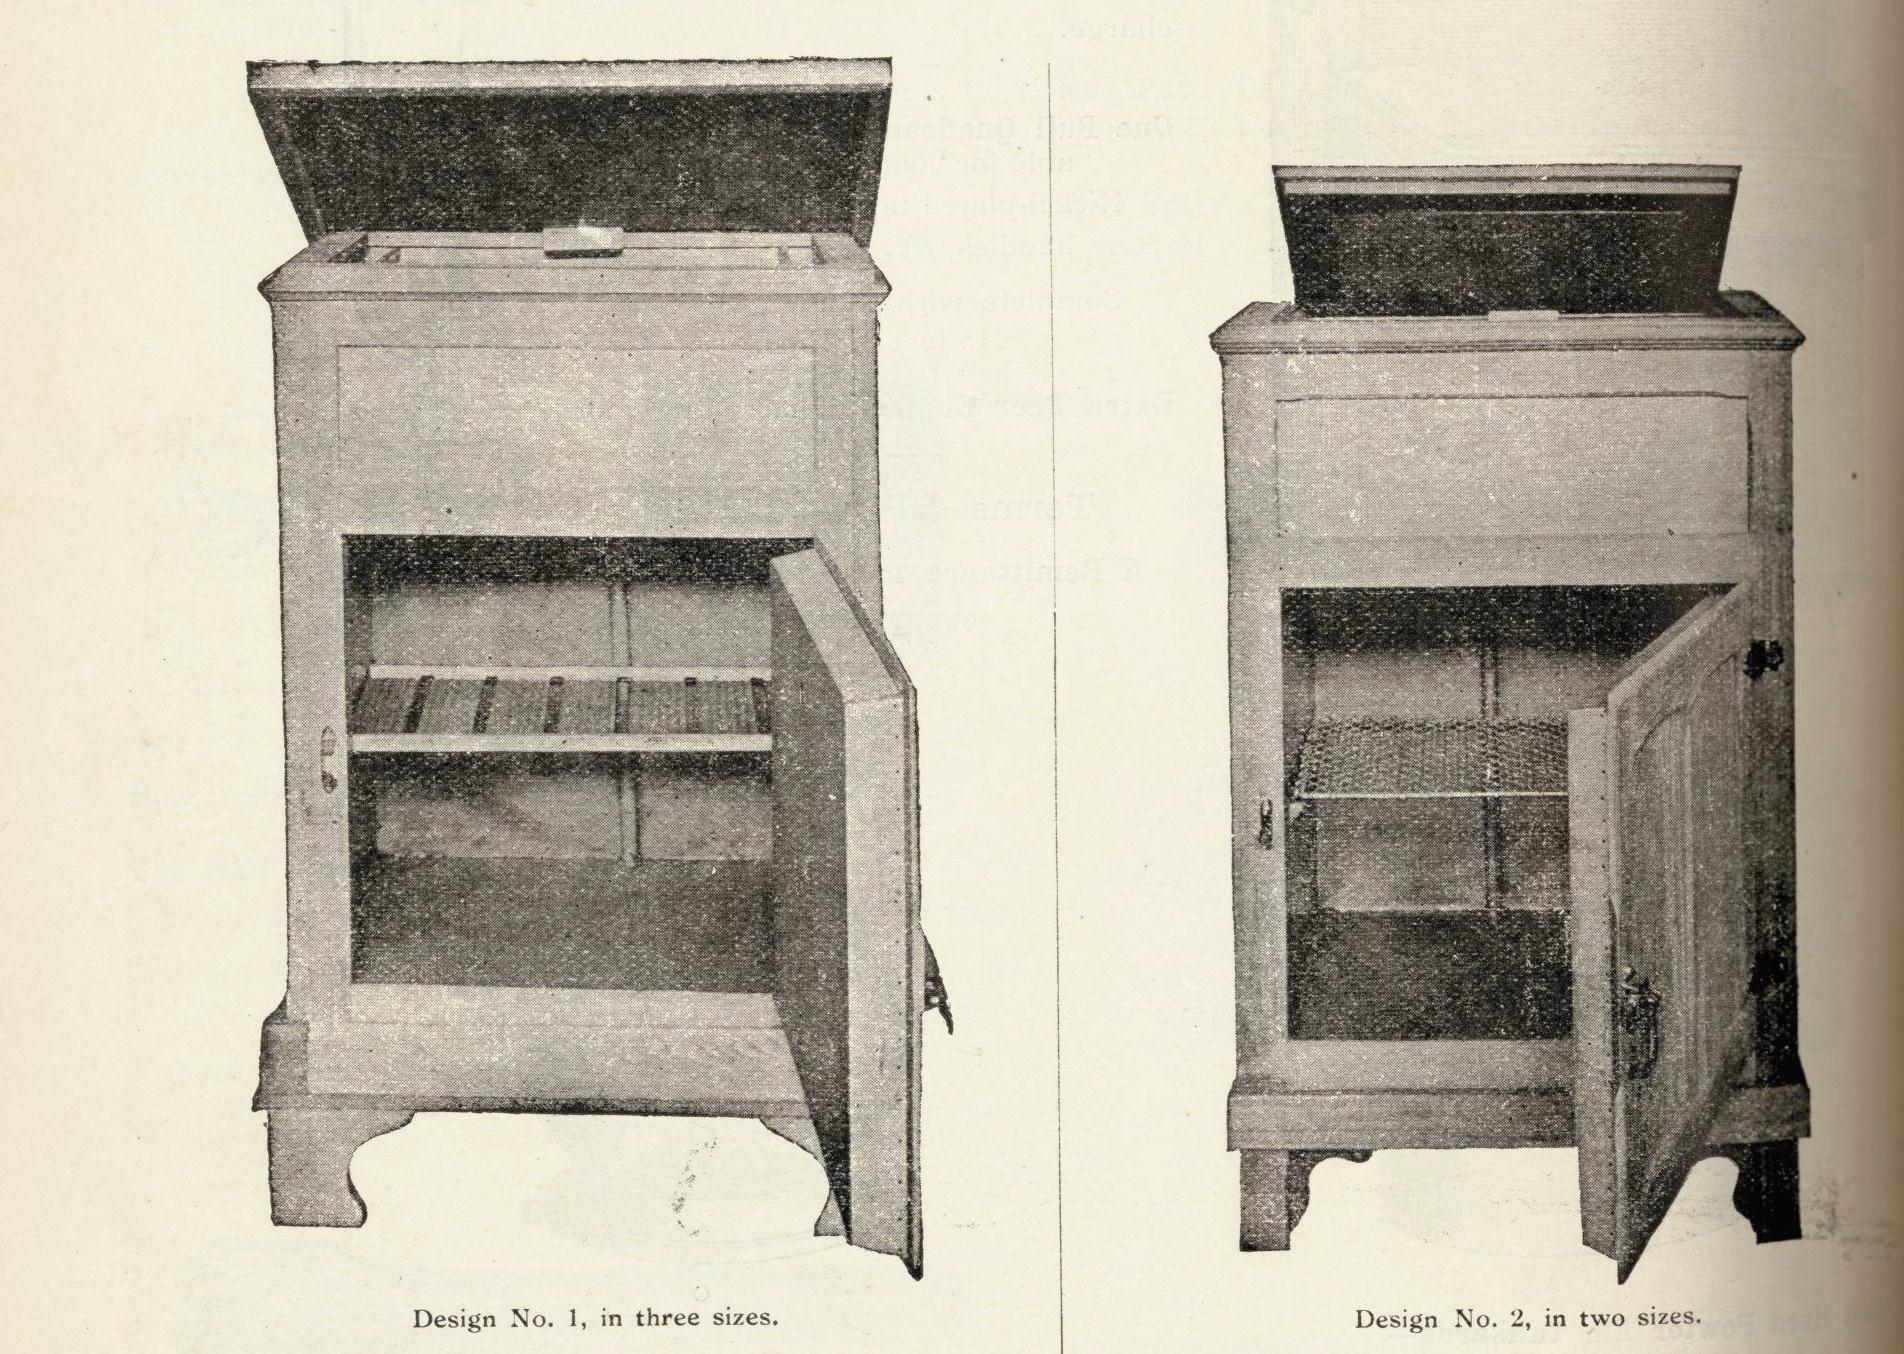 Ice chests advertised by Anthony Hordern and Sons. Chilcott refrigerator: Design no.1 and Design no.2